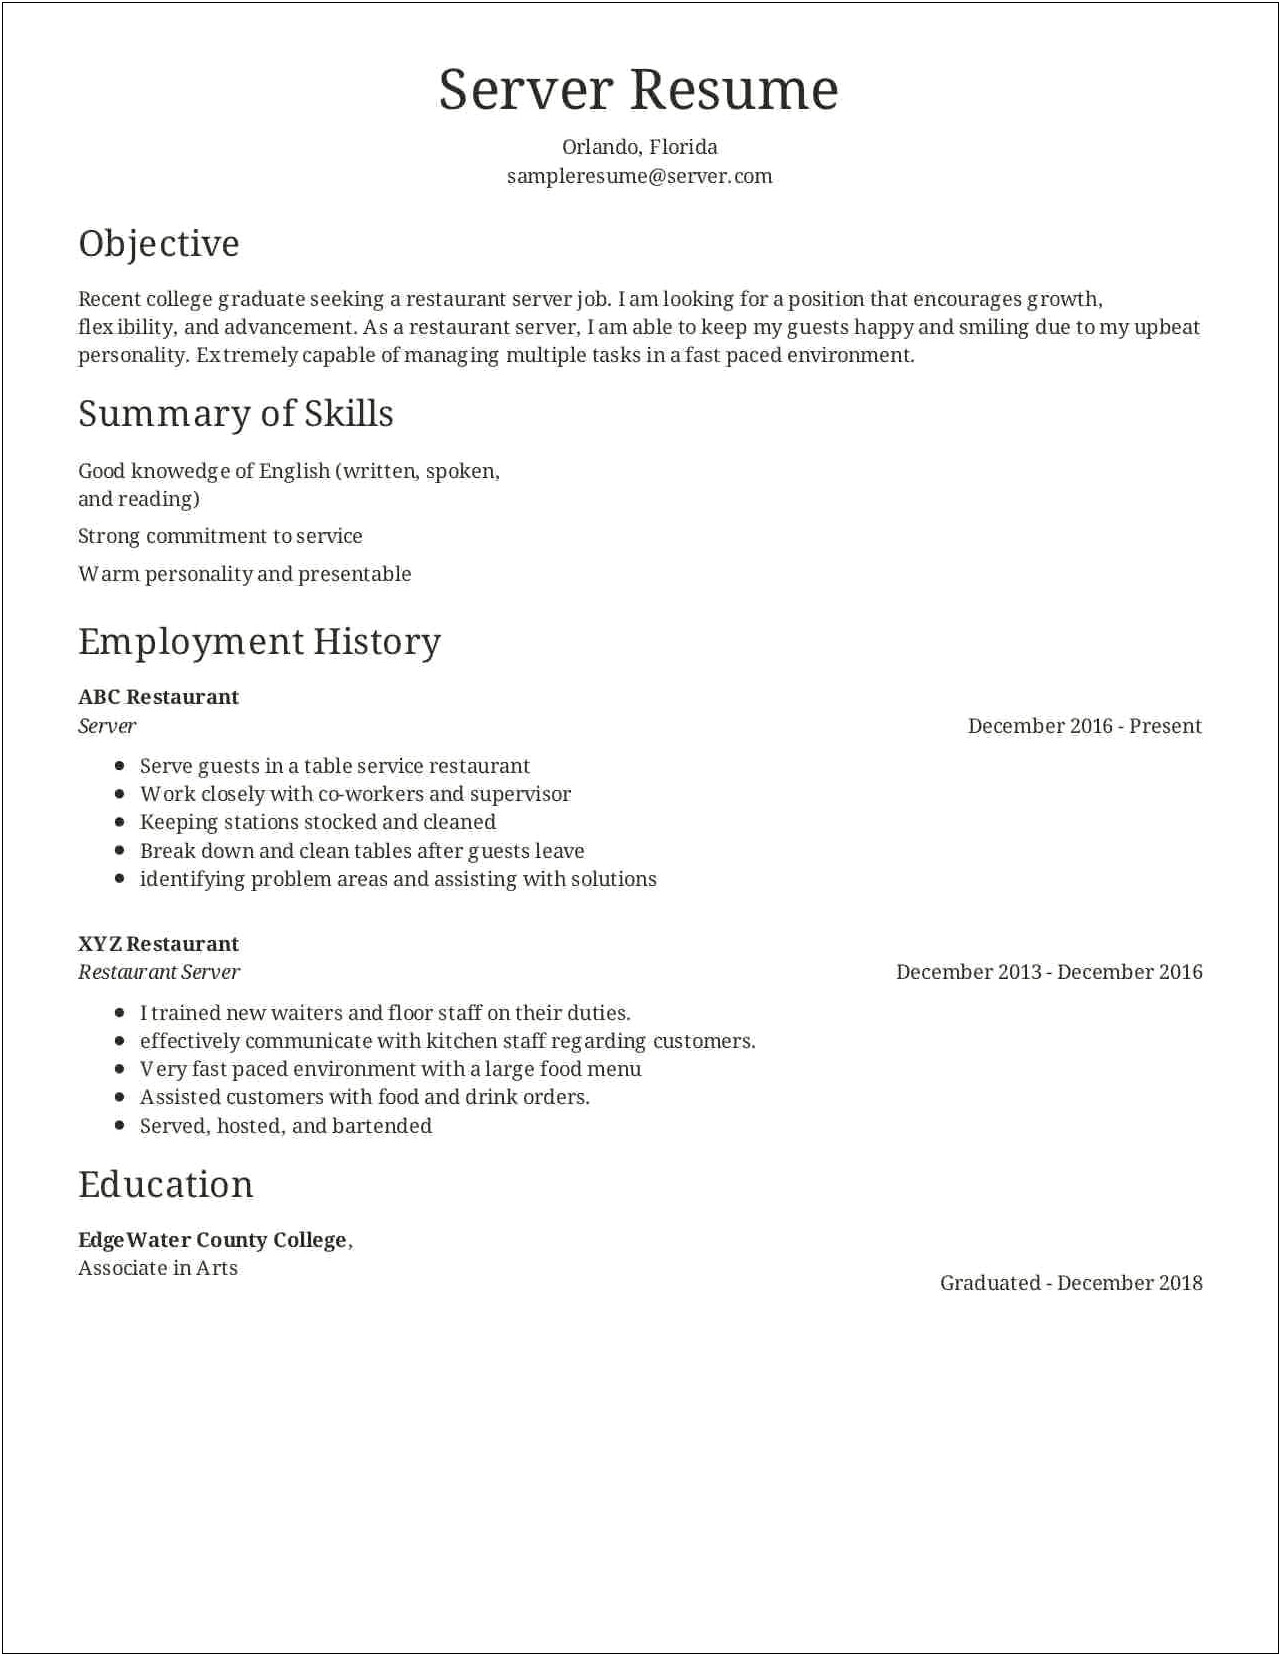 Sample Objective For Food Service Resume